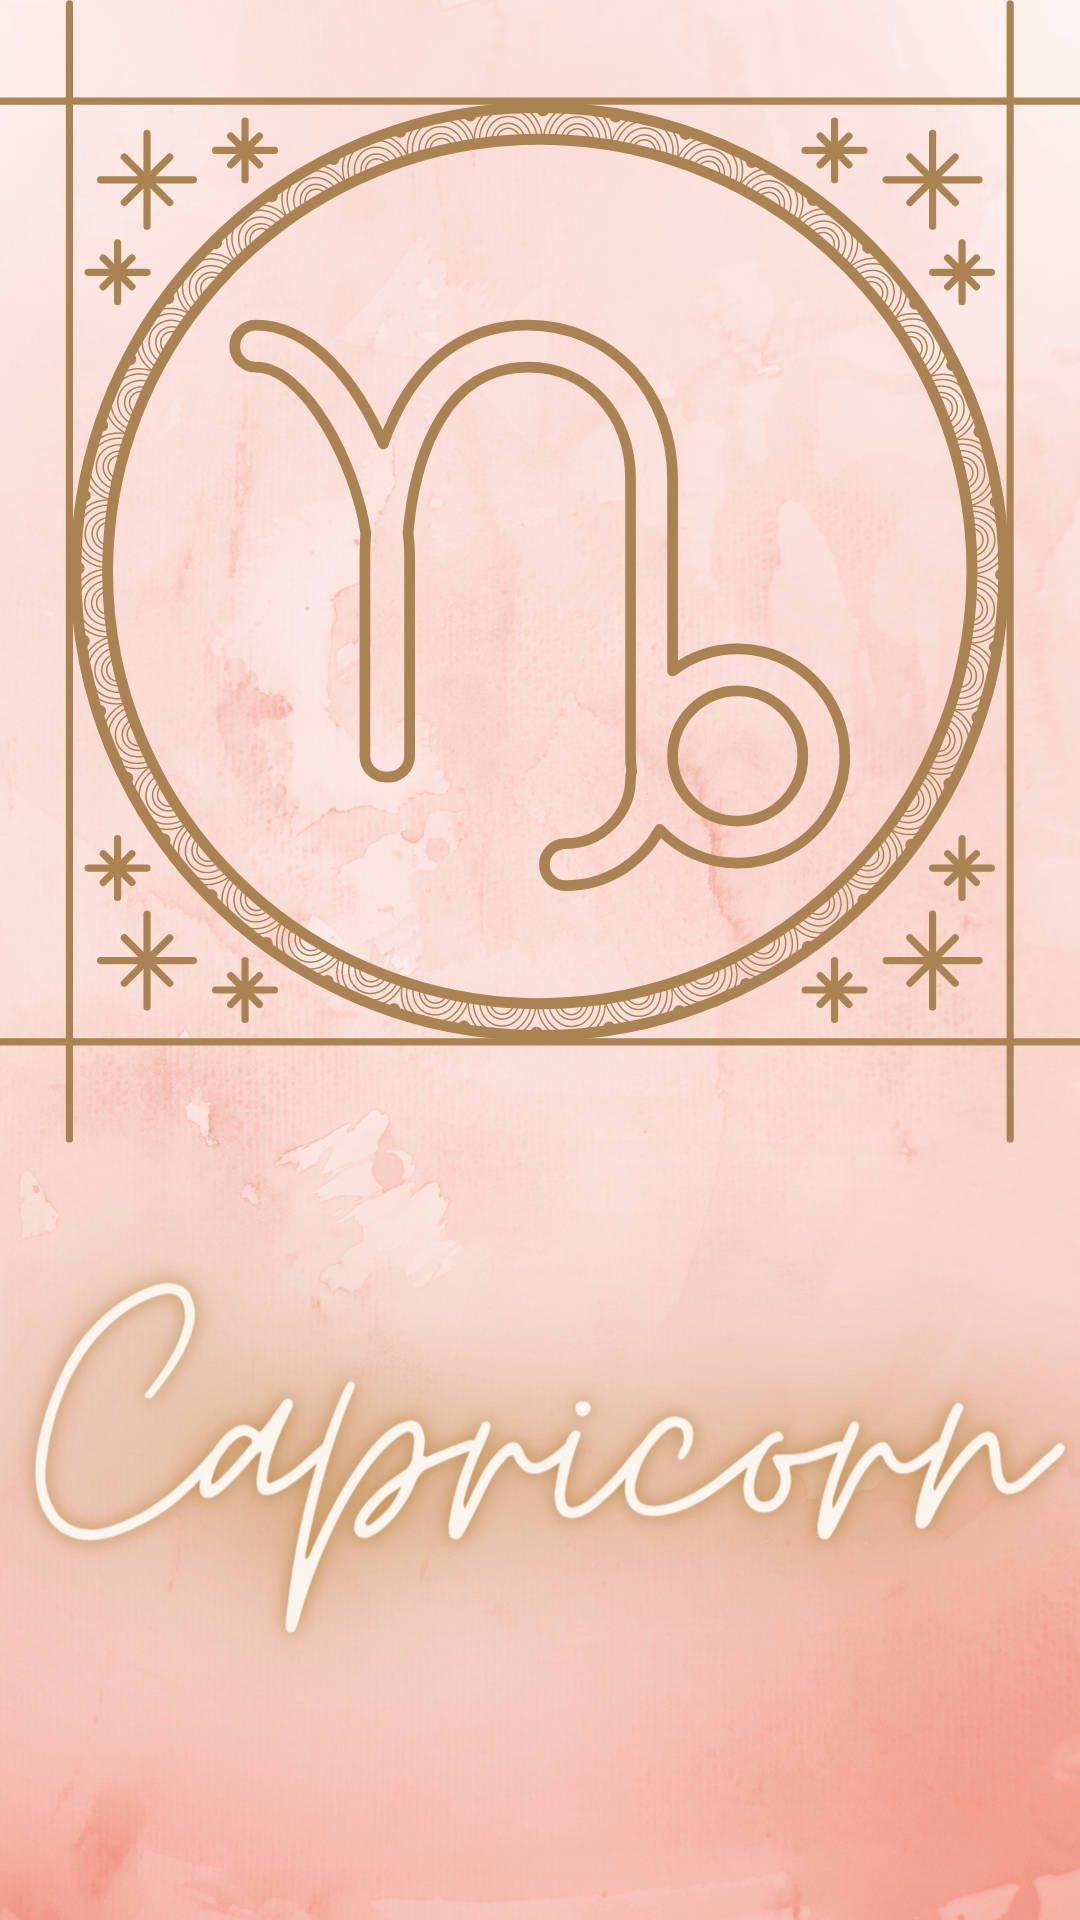 A pink and gold poster with the zodiac sign capricorn - Capricorn